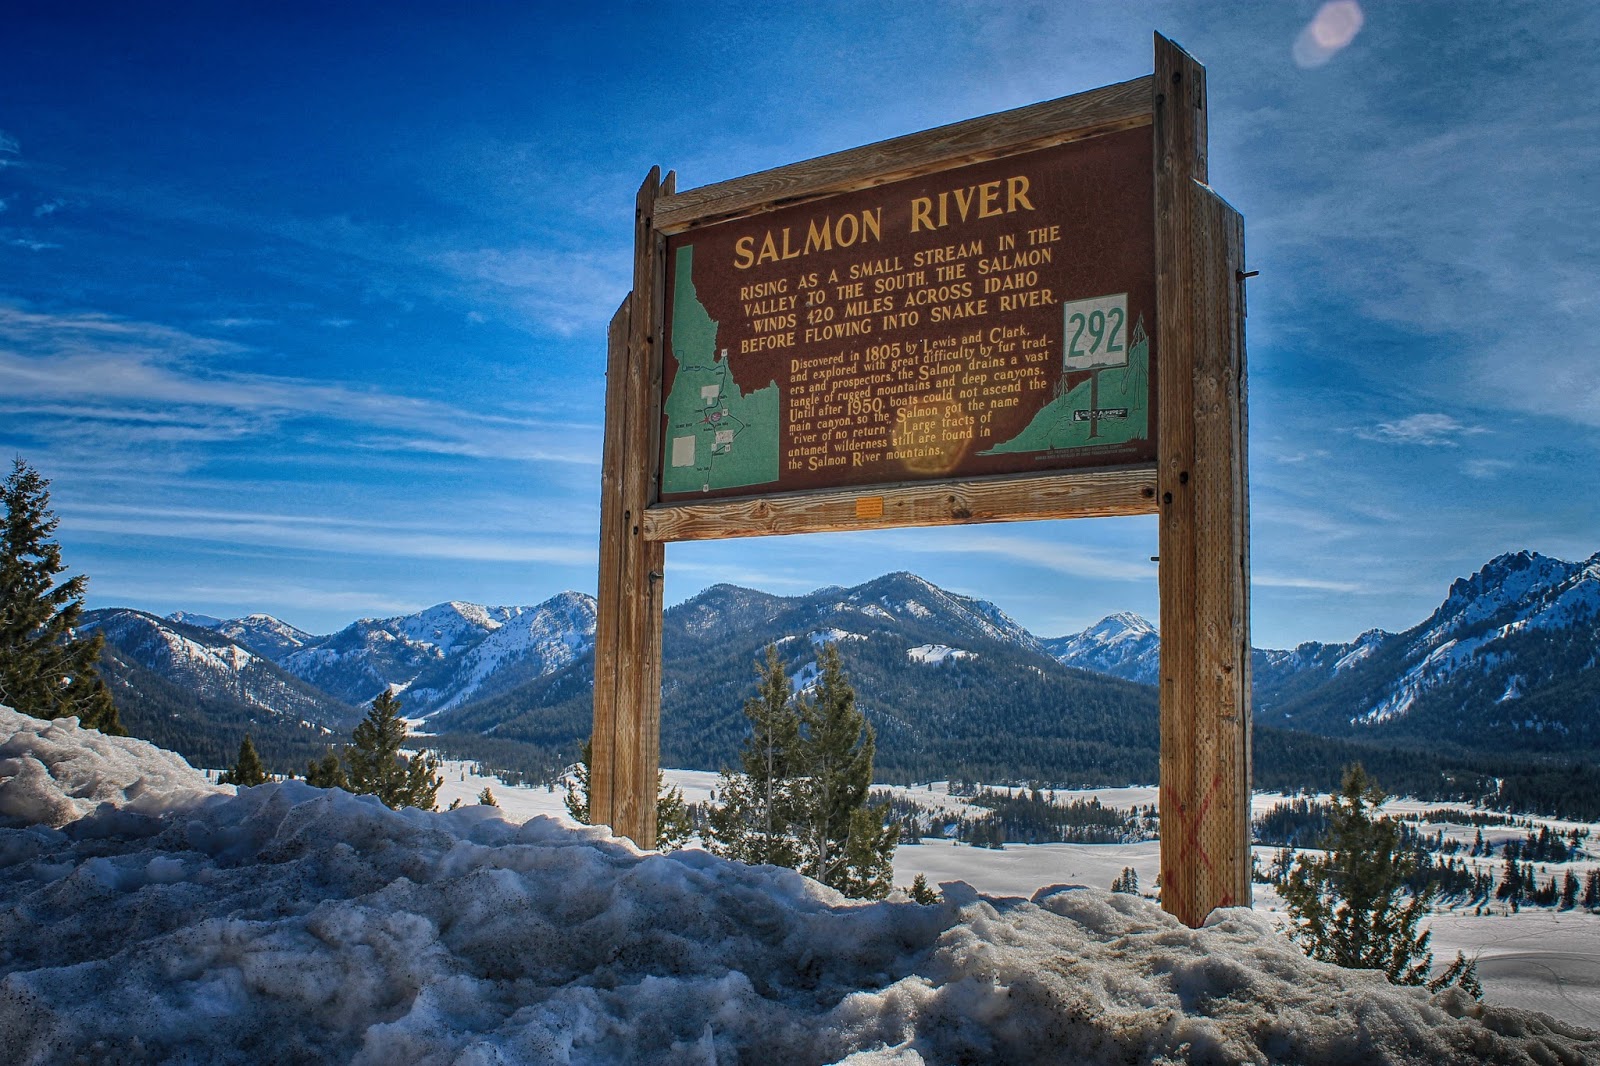 Find the headwaters of the Salmon River. 